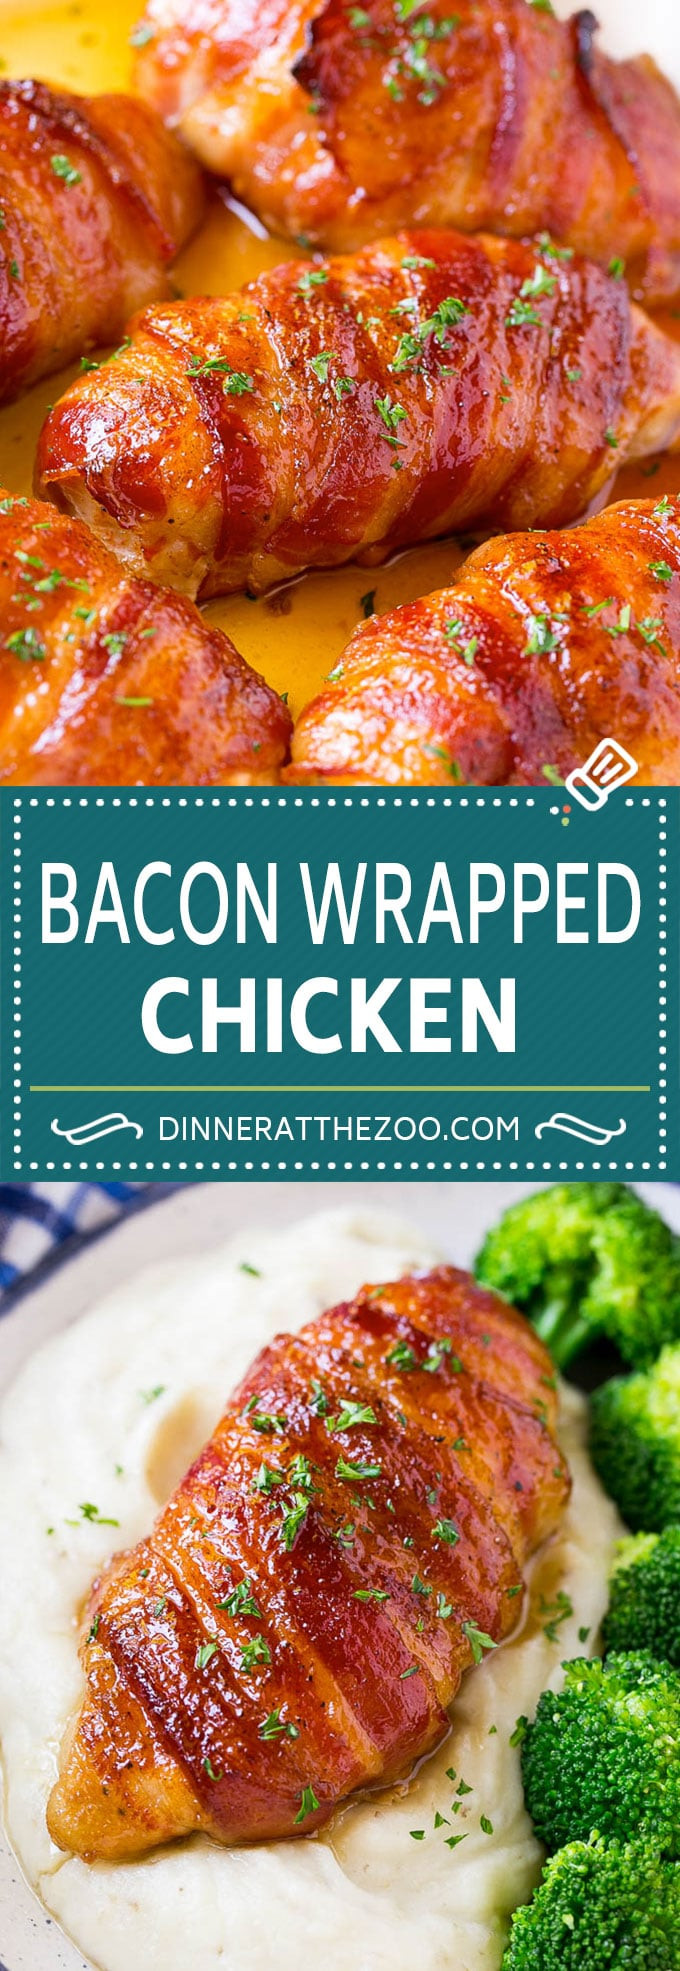 Dinner Ideas With Bacon
 Bacon Wrapped Chicken Dinner at the Zoo